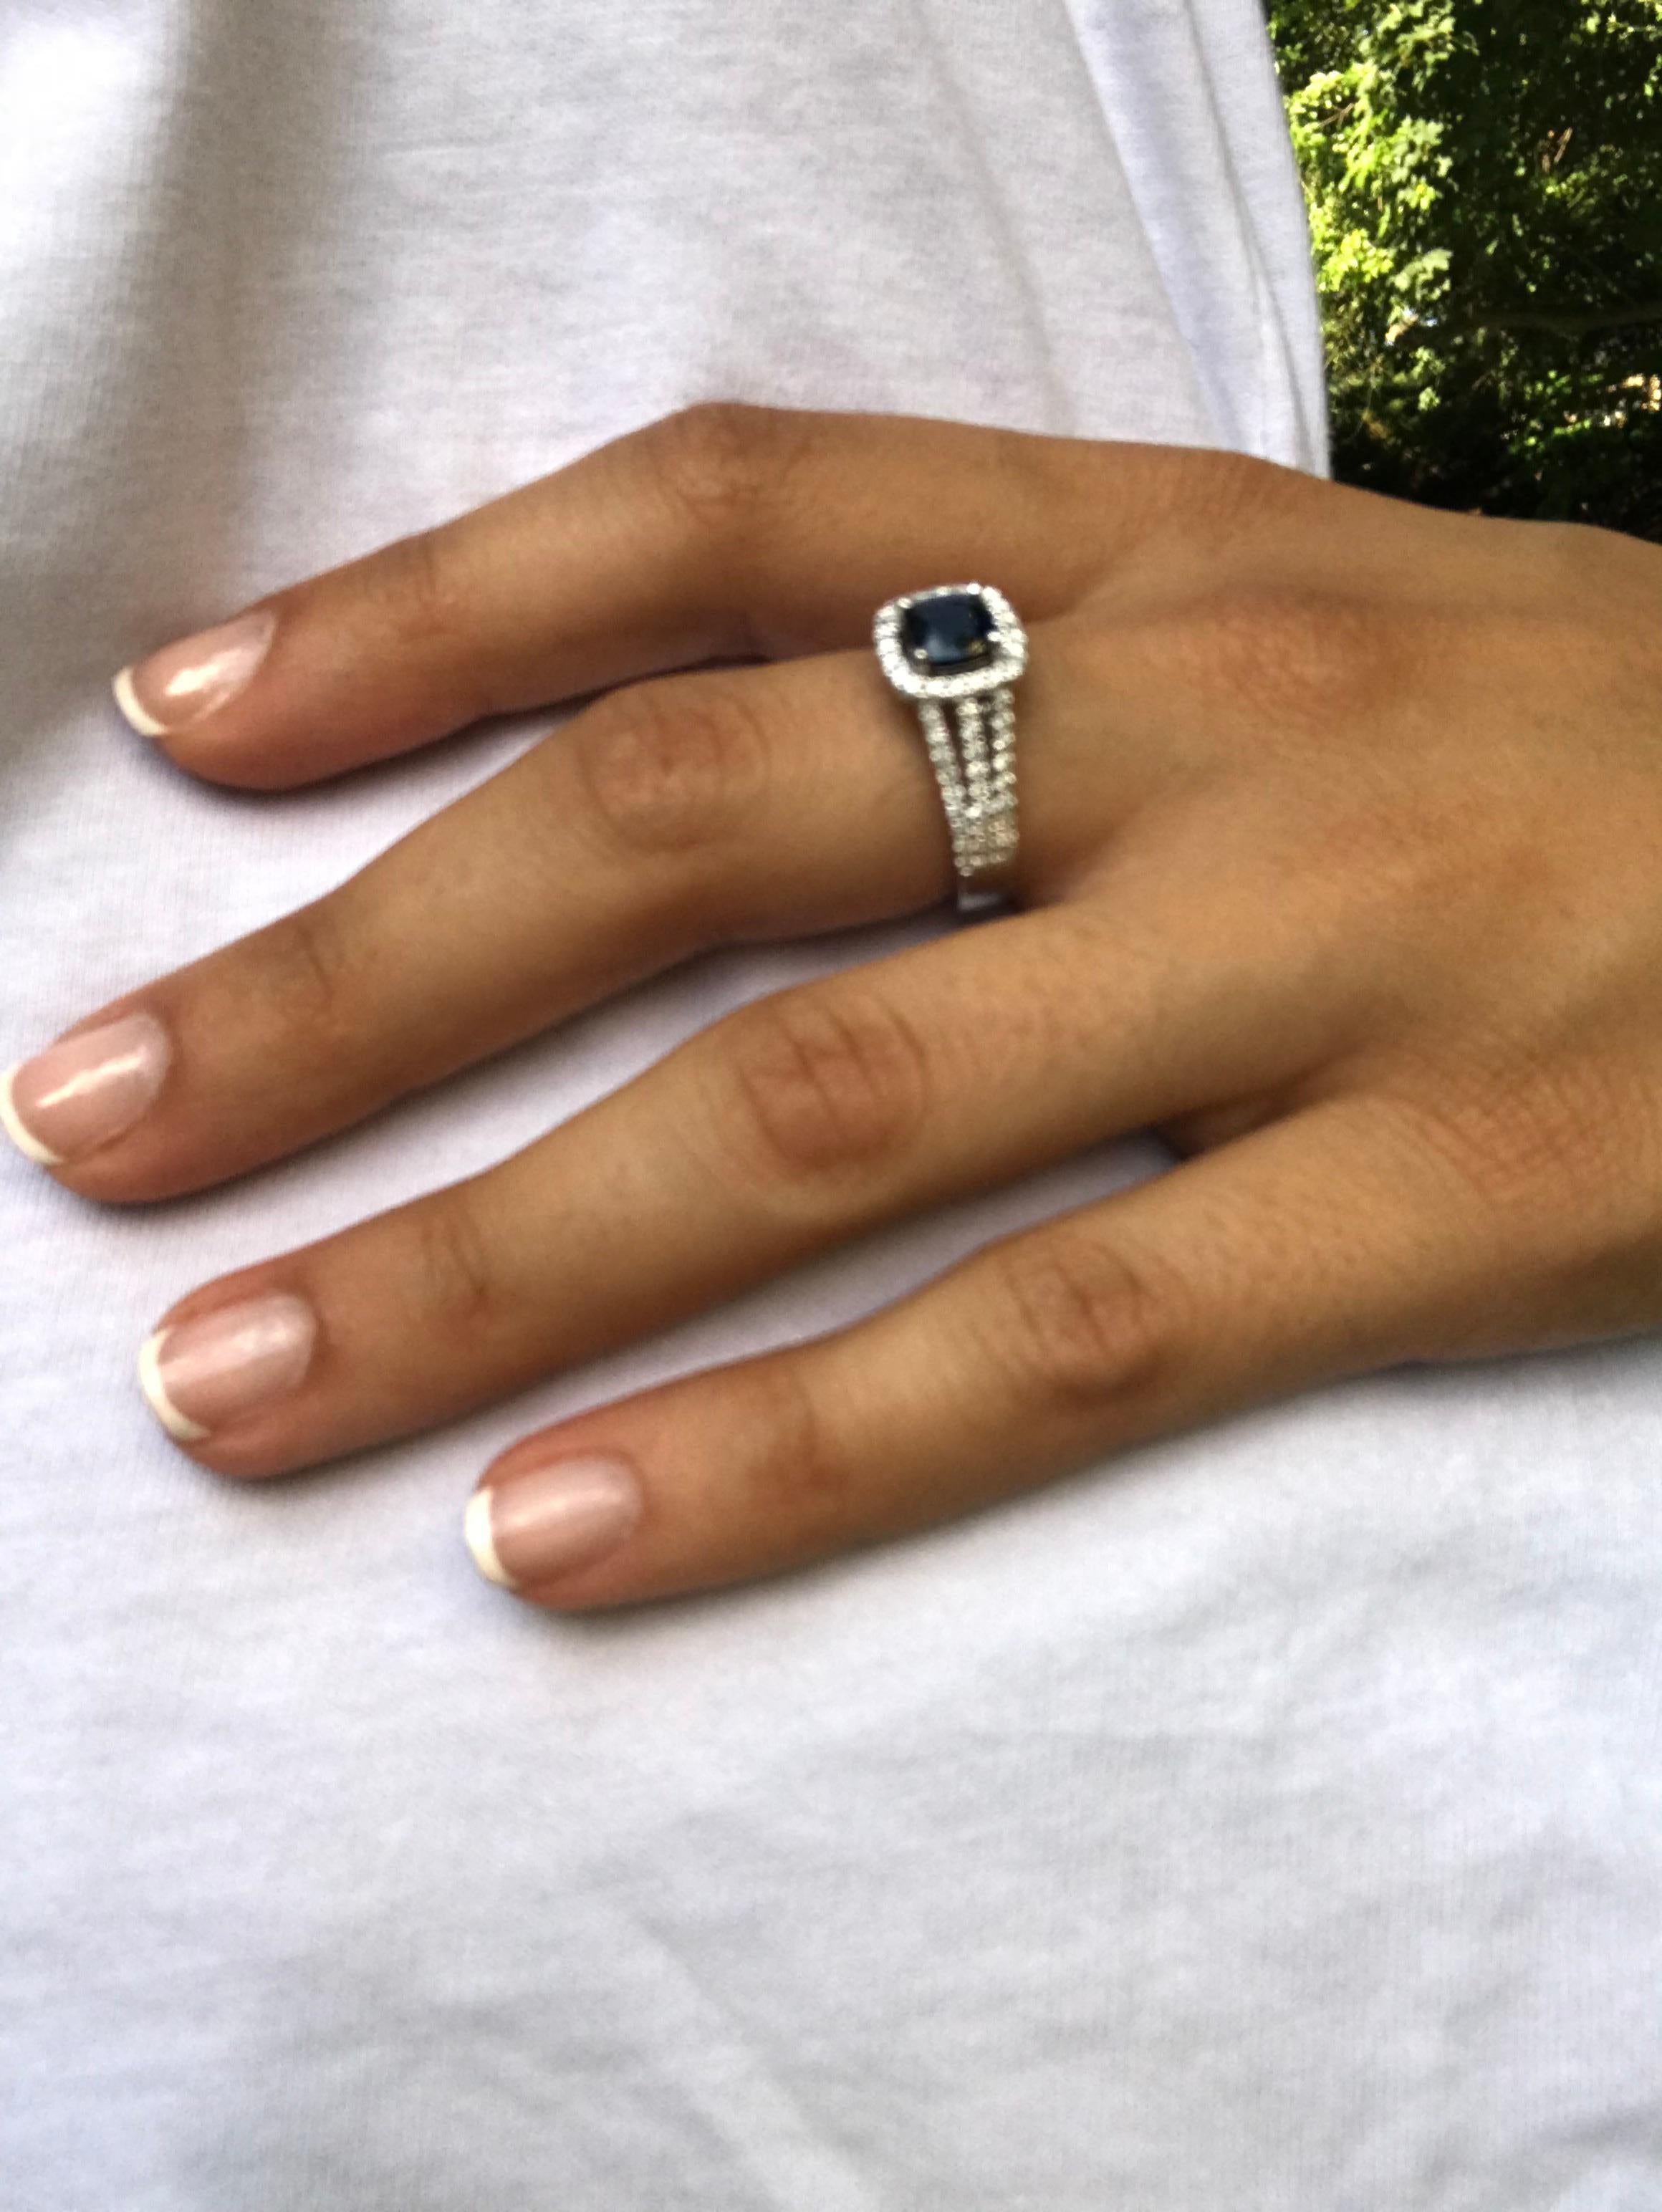 The square / cushion sapphire in this ring has a total carat weight of 1.04 carats. The diamonds have a total carat weight of 0.53 carats.
All our Gemstones are genuine, and are sourced with the highest degree of integrity.